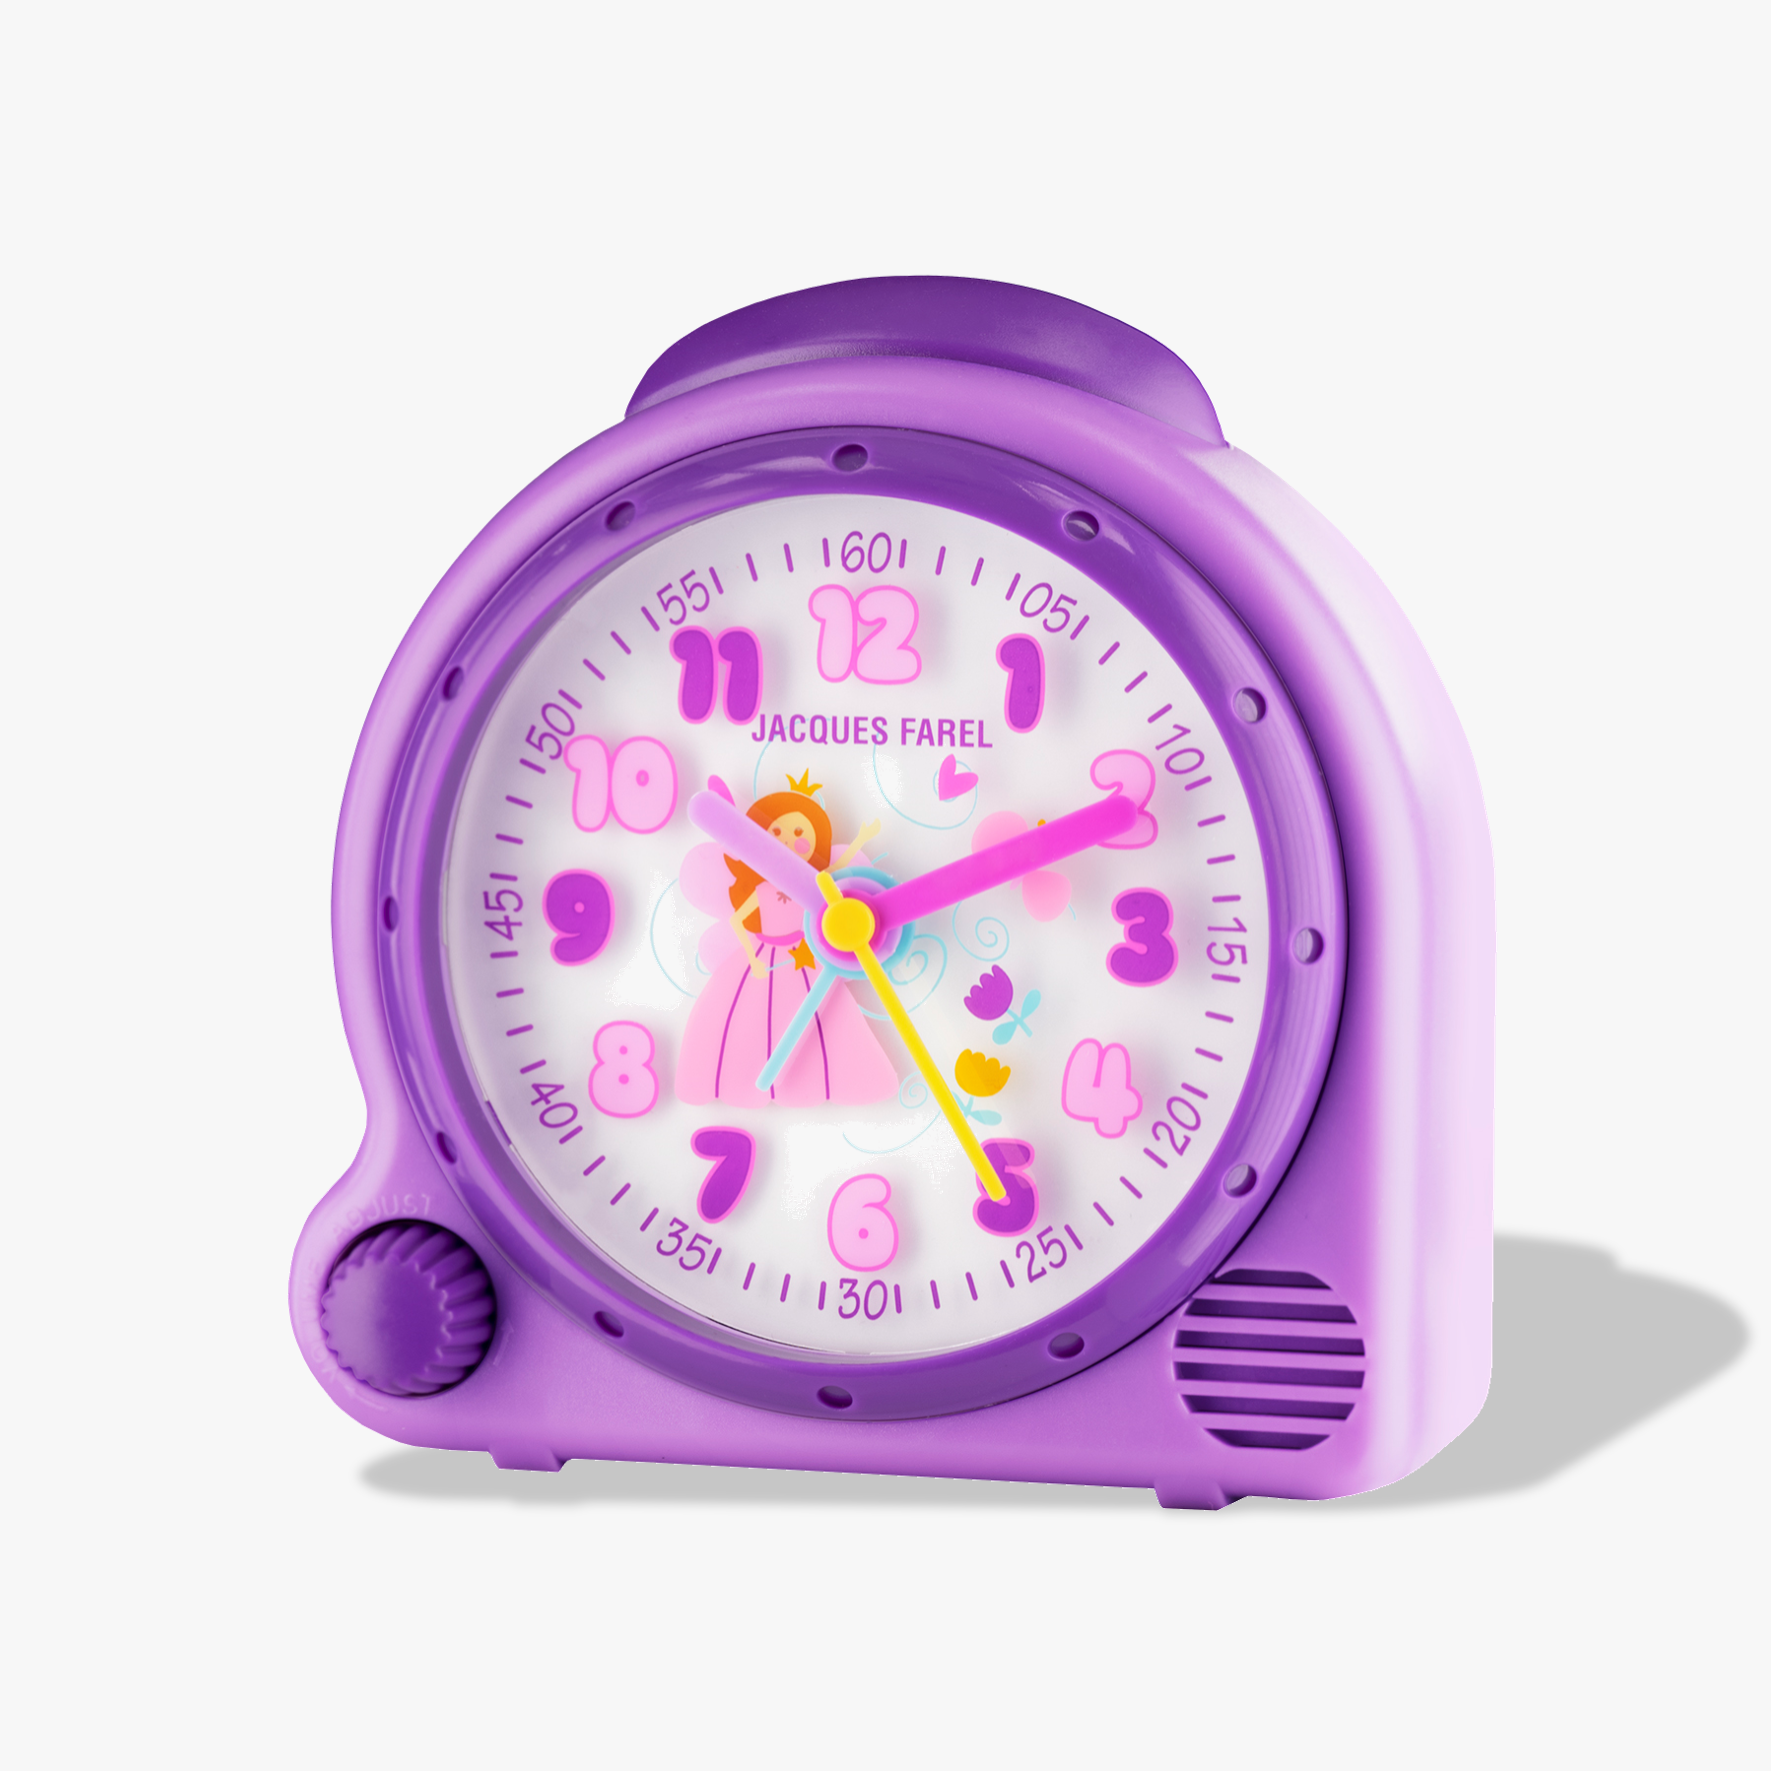 AVC17 children's alarm clock with fairy motif and LED lighting